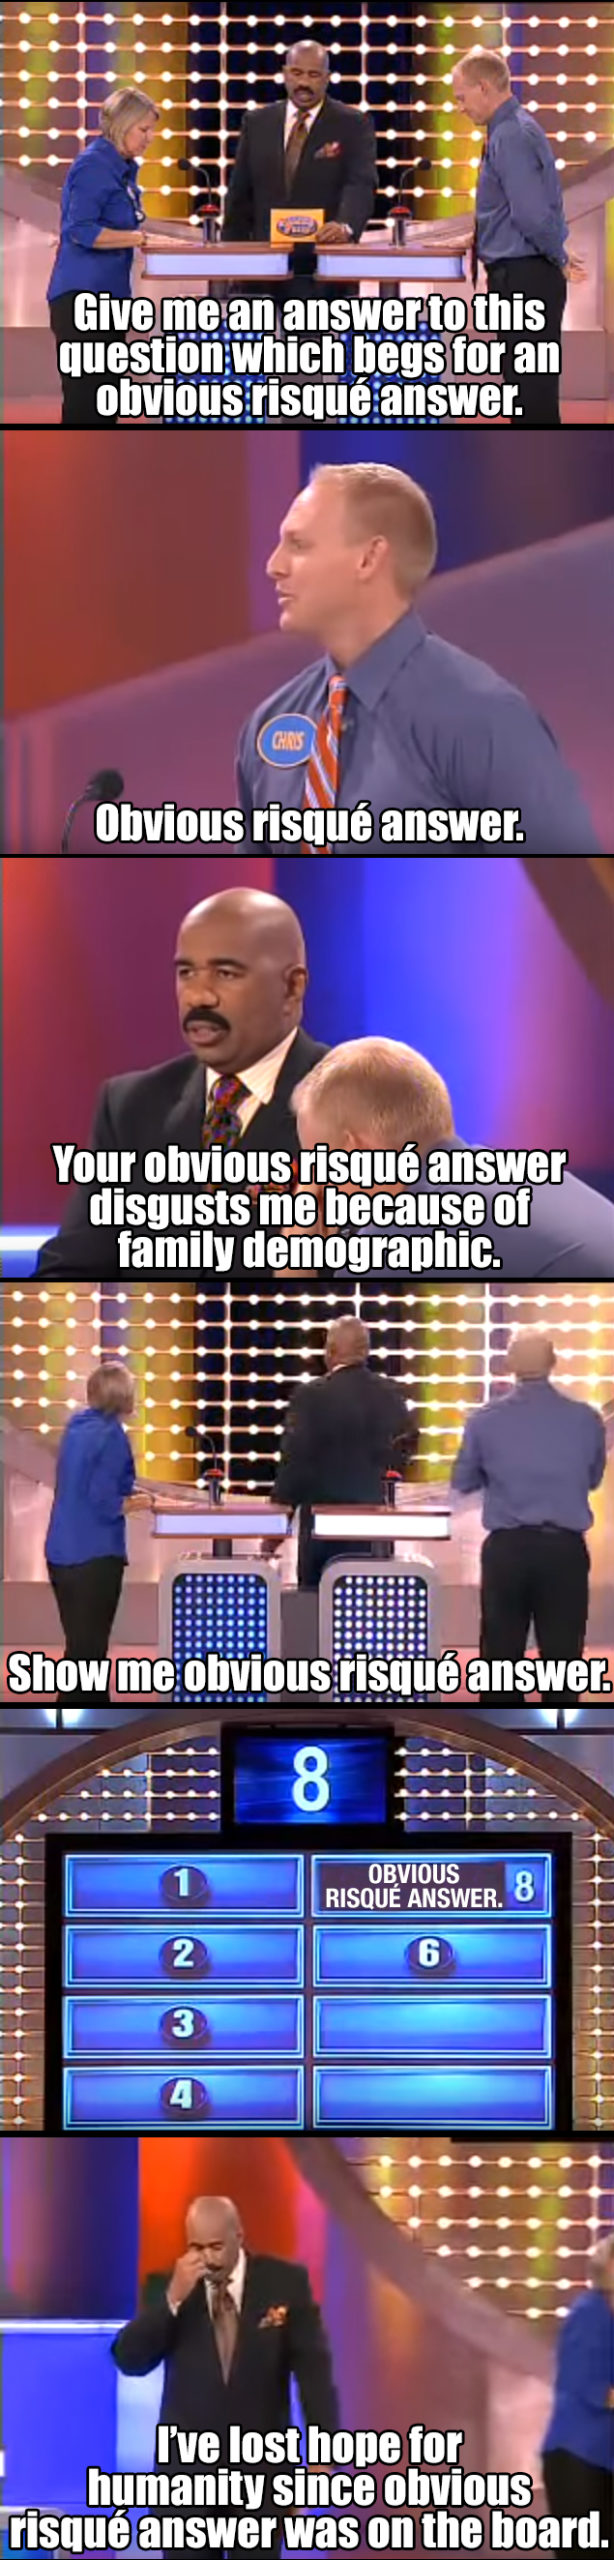 Family+Feud.+Lather%2C+rinse%2C+repeat.